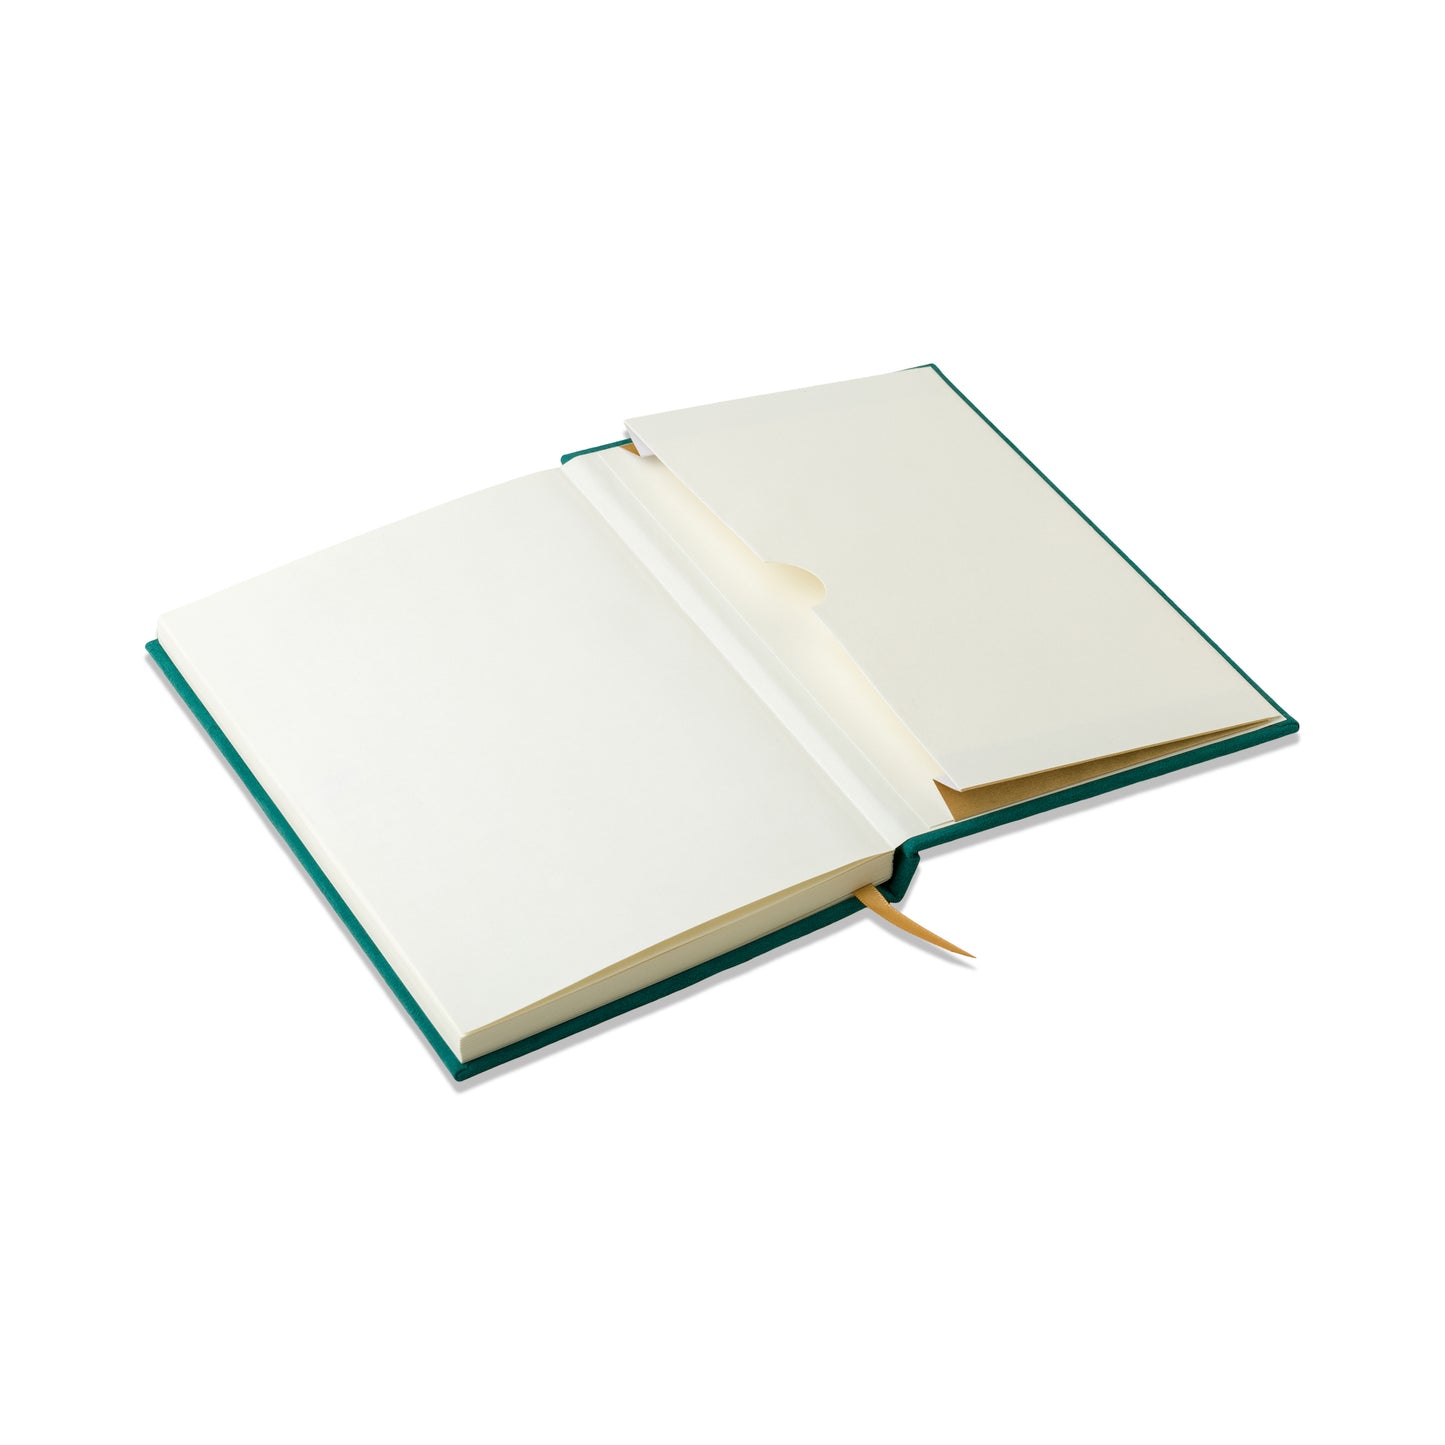 Hard Cover Suede Cloth Journal With Pocket - Linear Boxes lay flat with pocket folder